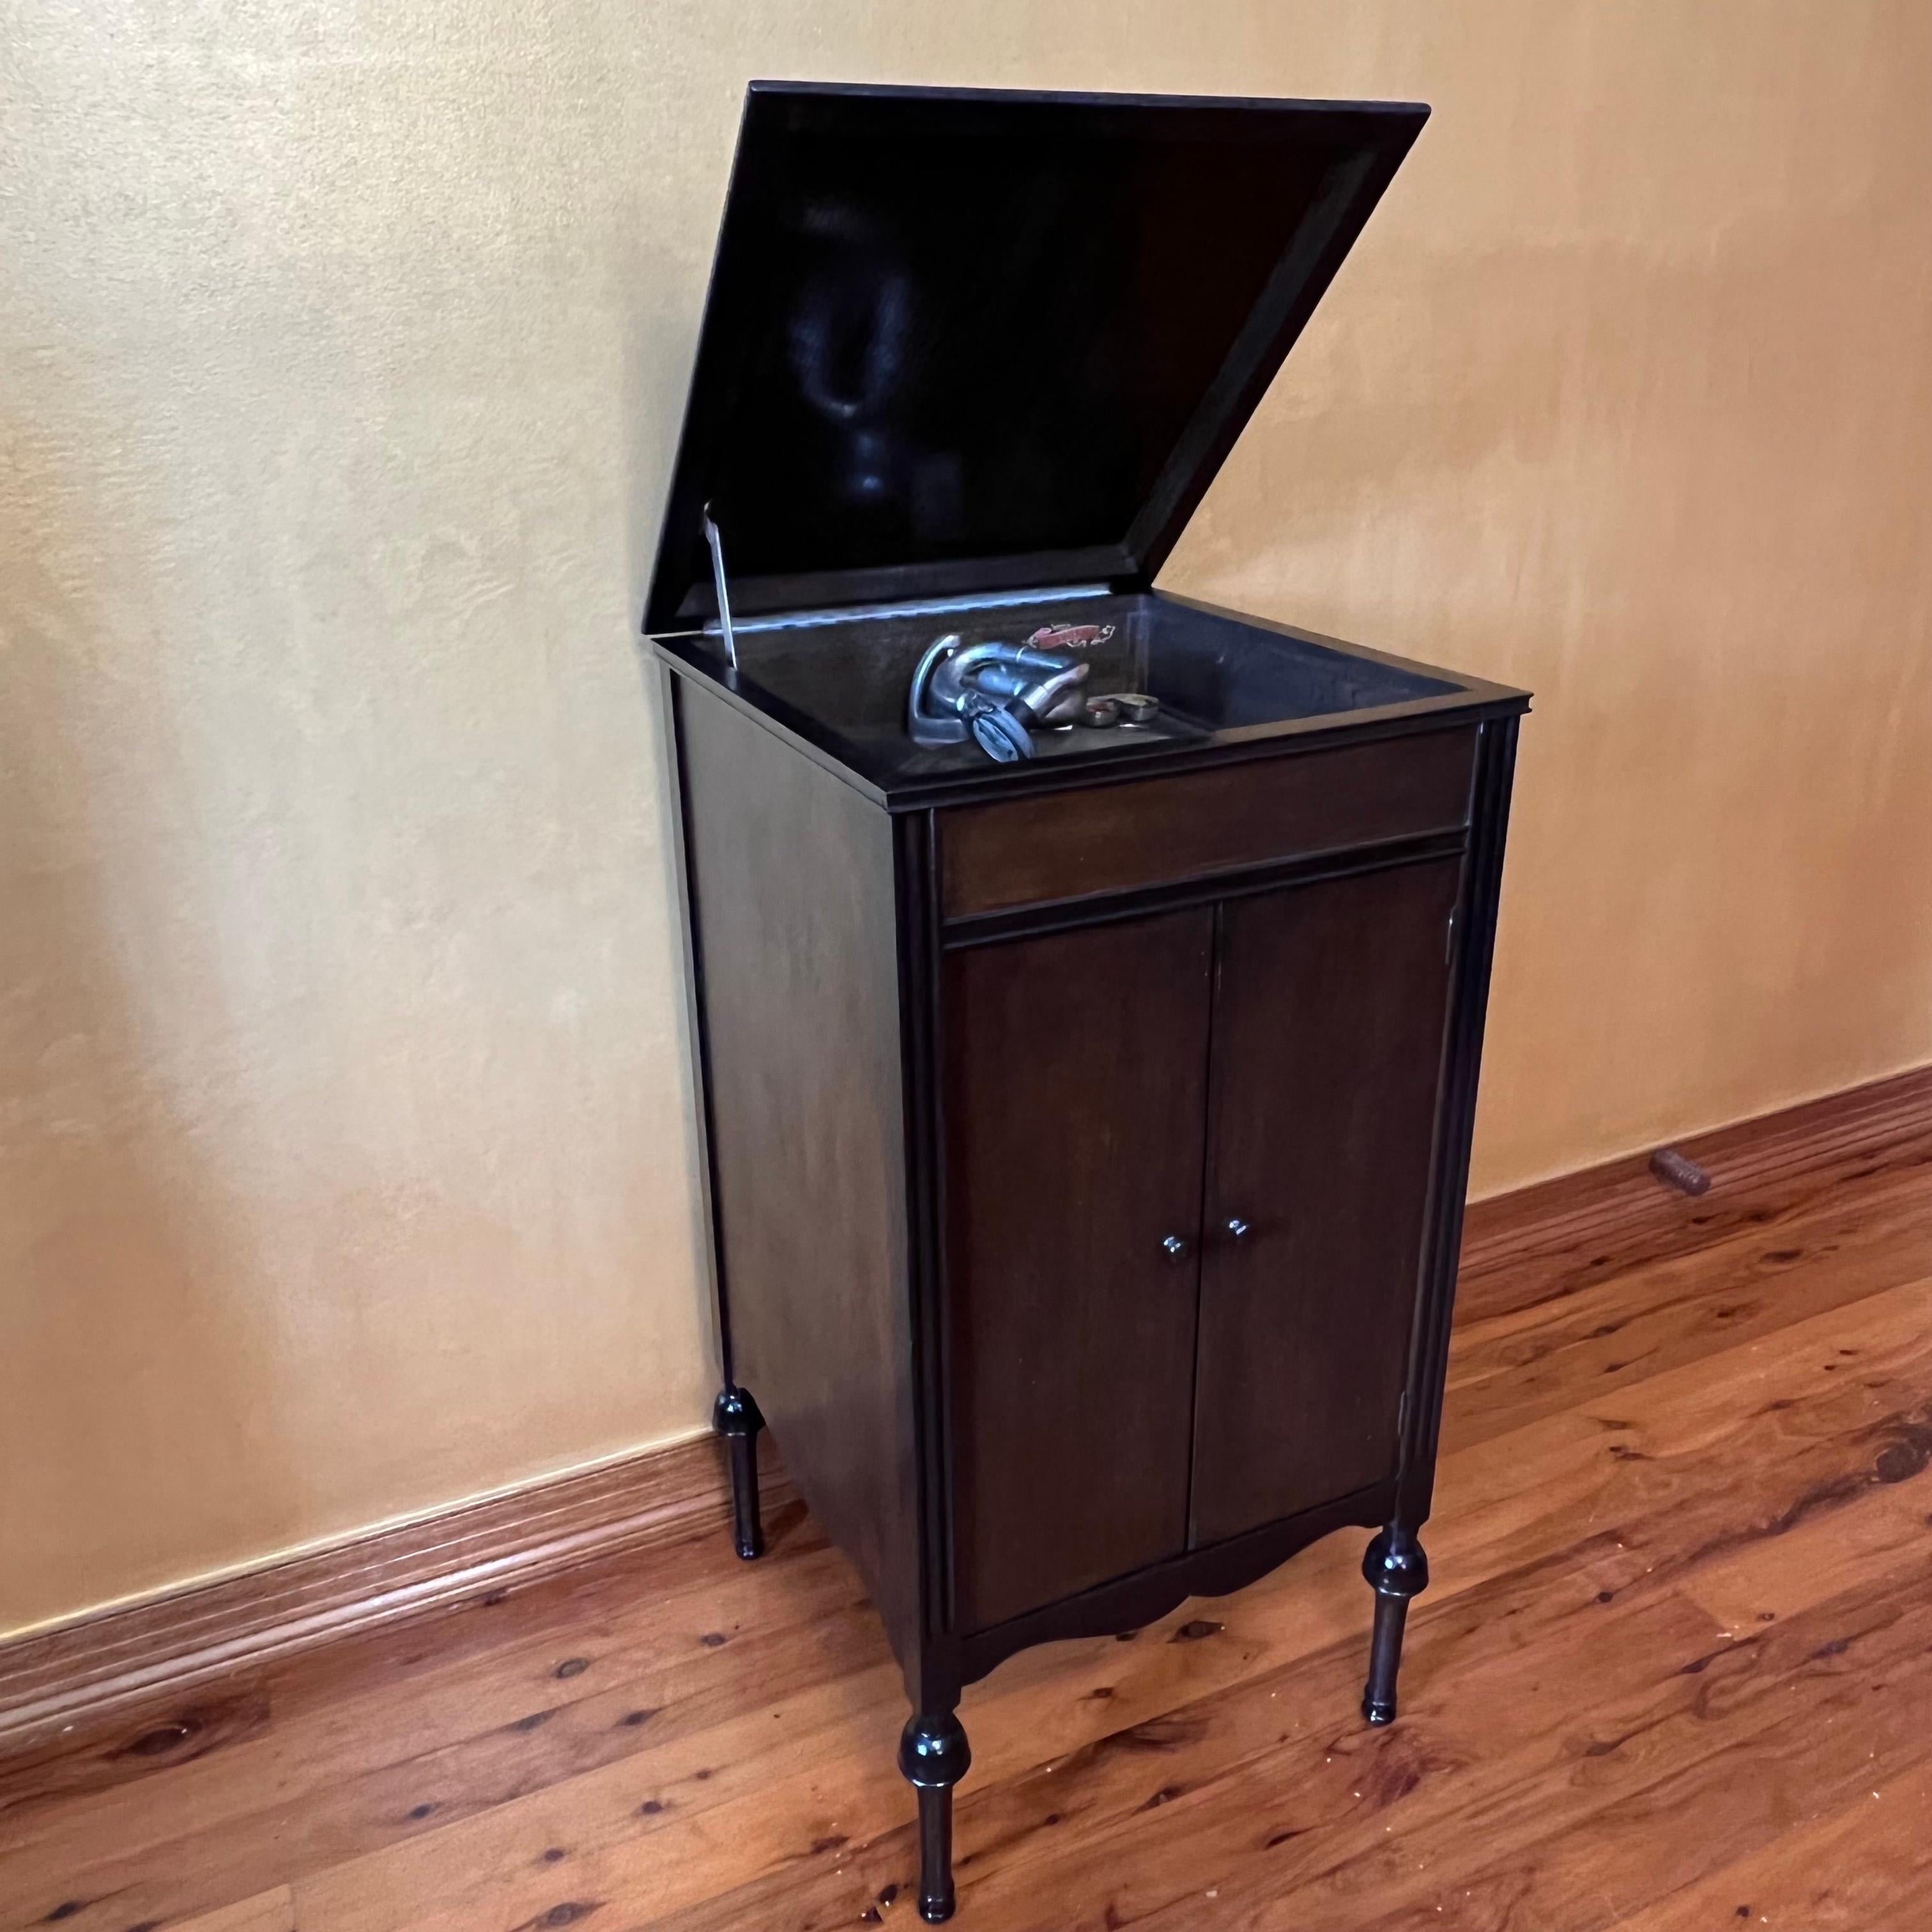 In working order, to operate you wind up the handle on the side, the lid can sit up and down the cupboard opens where the speaker is with two shelves to store your recorders, comes with multi pins to change record pin.

Circa: 1920

Material: